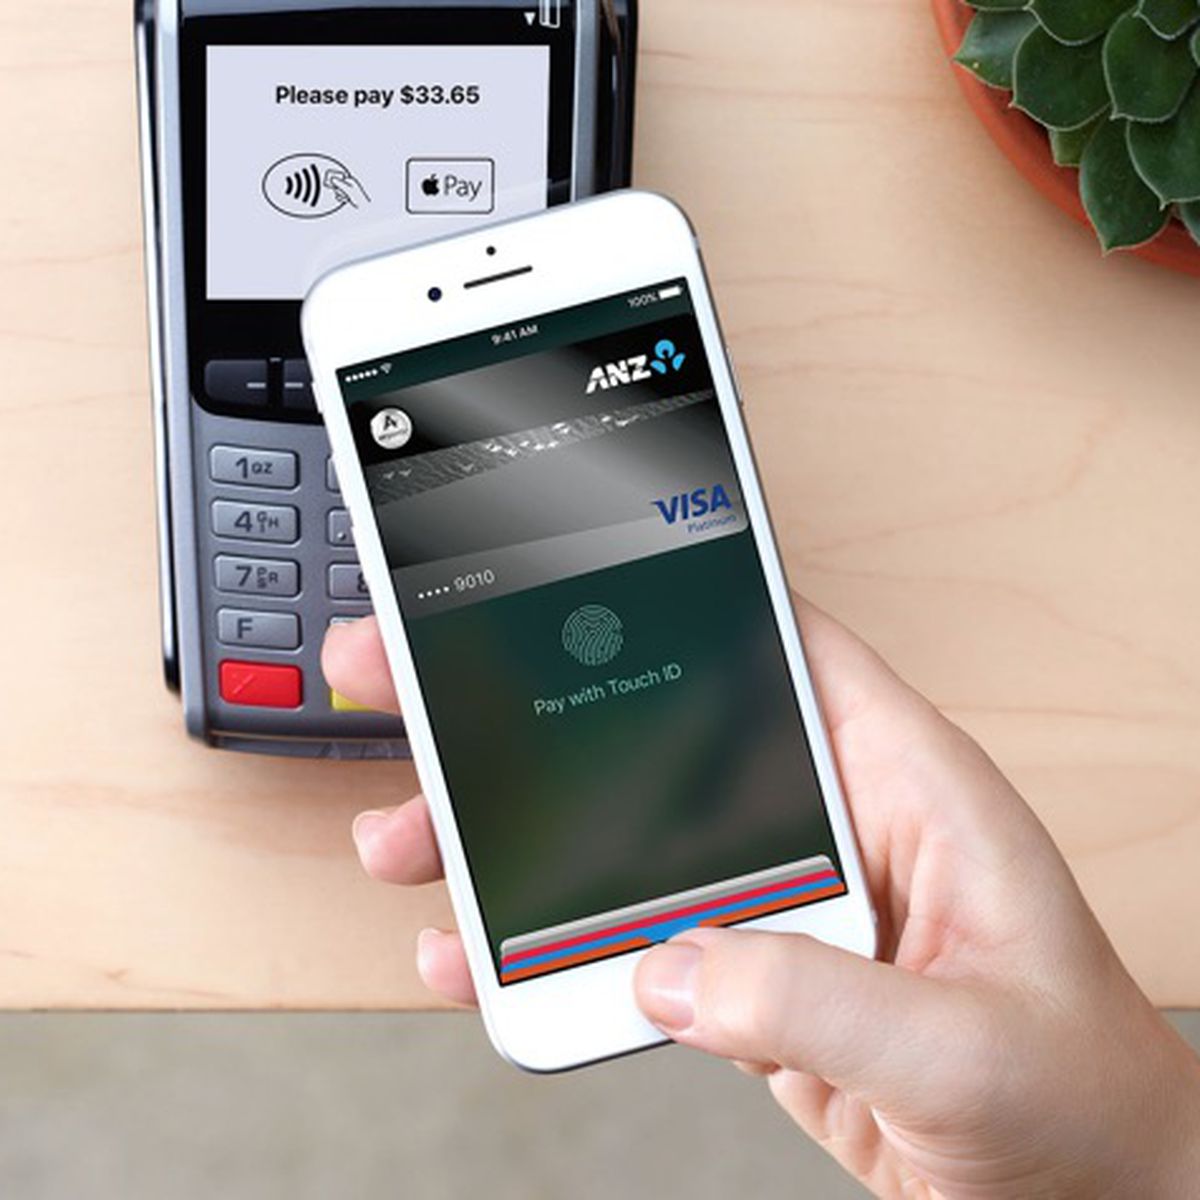 Apple Pay Launches in New Zealand Through Partnership With ANZ